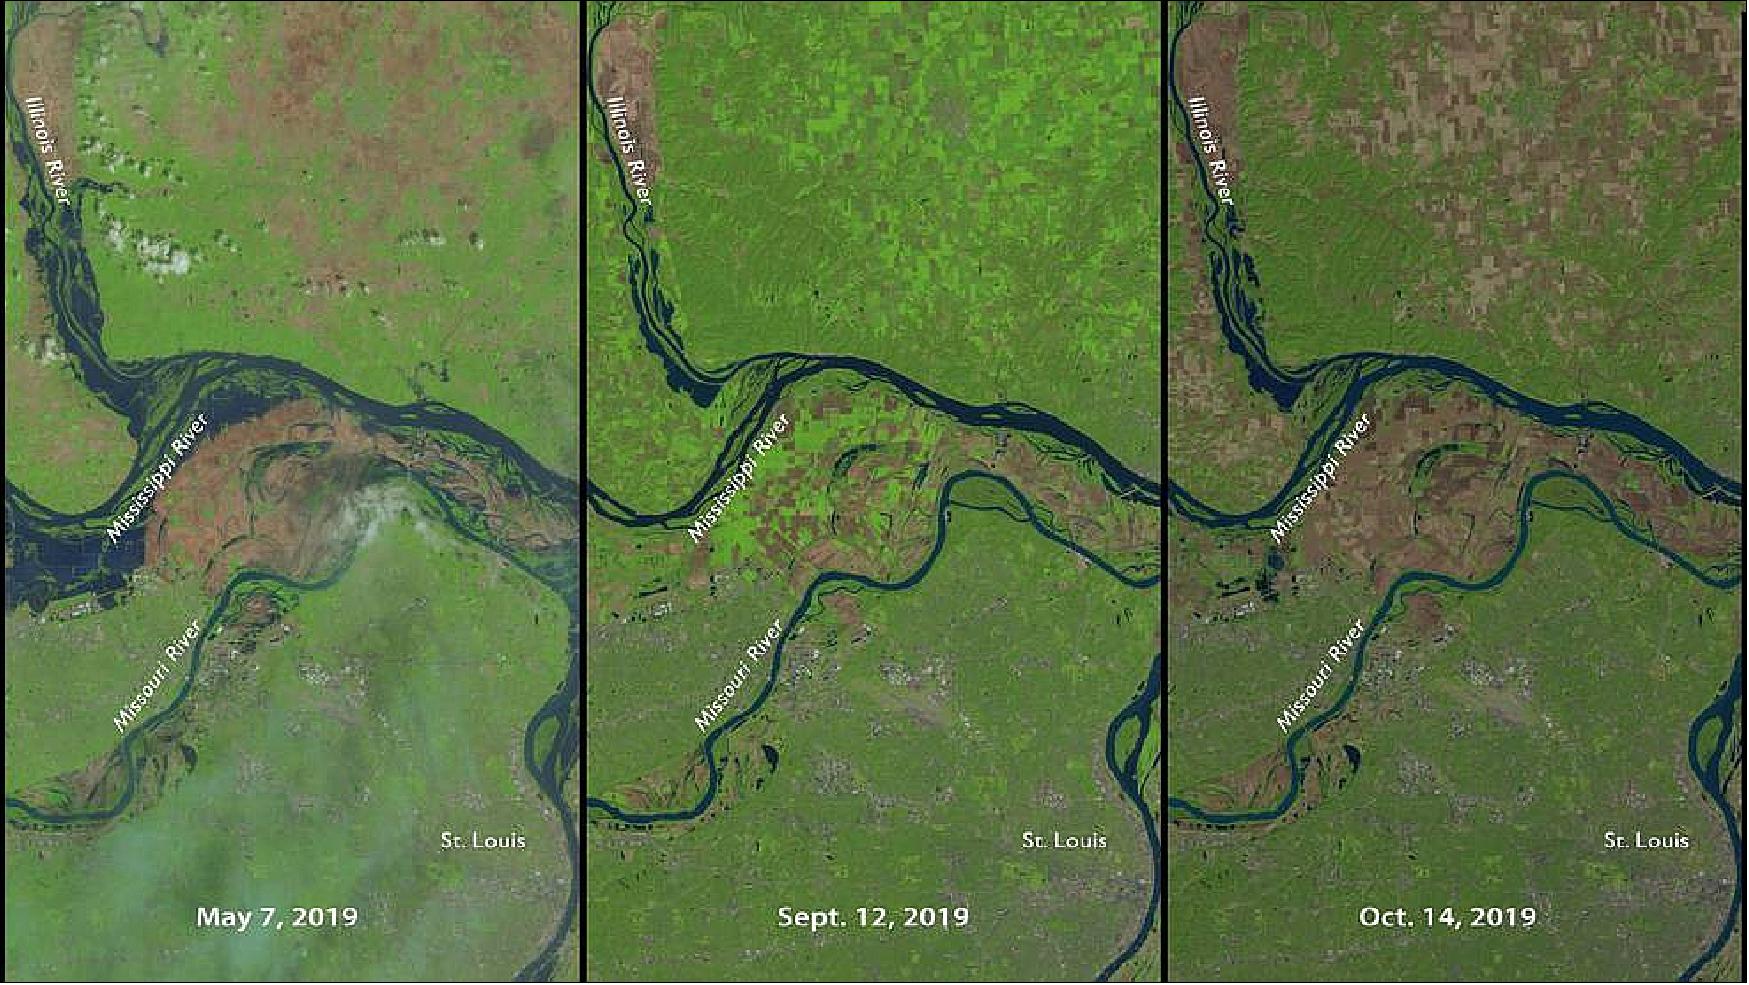 Figure 10: Three moments in a tumultuous year for farming north of St. Louis, MO, as seen in NASA-USGS Landsat-8 data. On the left is May 7, 2019, as heavy rains delayed planting for many farms. Sept 12, 2019, in the middle, shows bright green signifying growing vegetation, although with a fair amount of brown, bare fields. On the right, Oct. 14, 2019, the light brown indicates harvested fields while darker brown are fields that have not been seeded or fallow all summer (image credits: NASA)